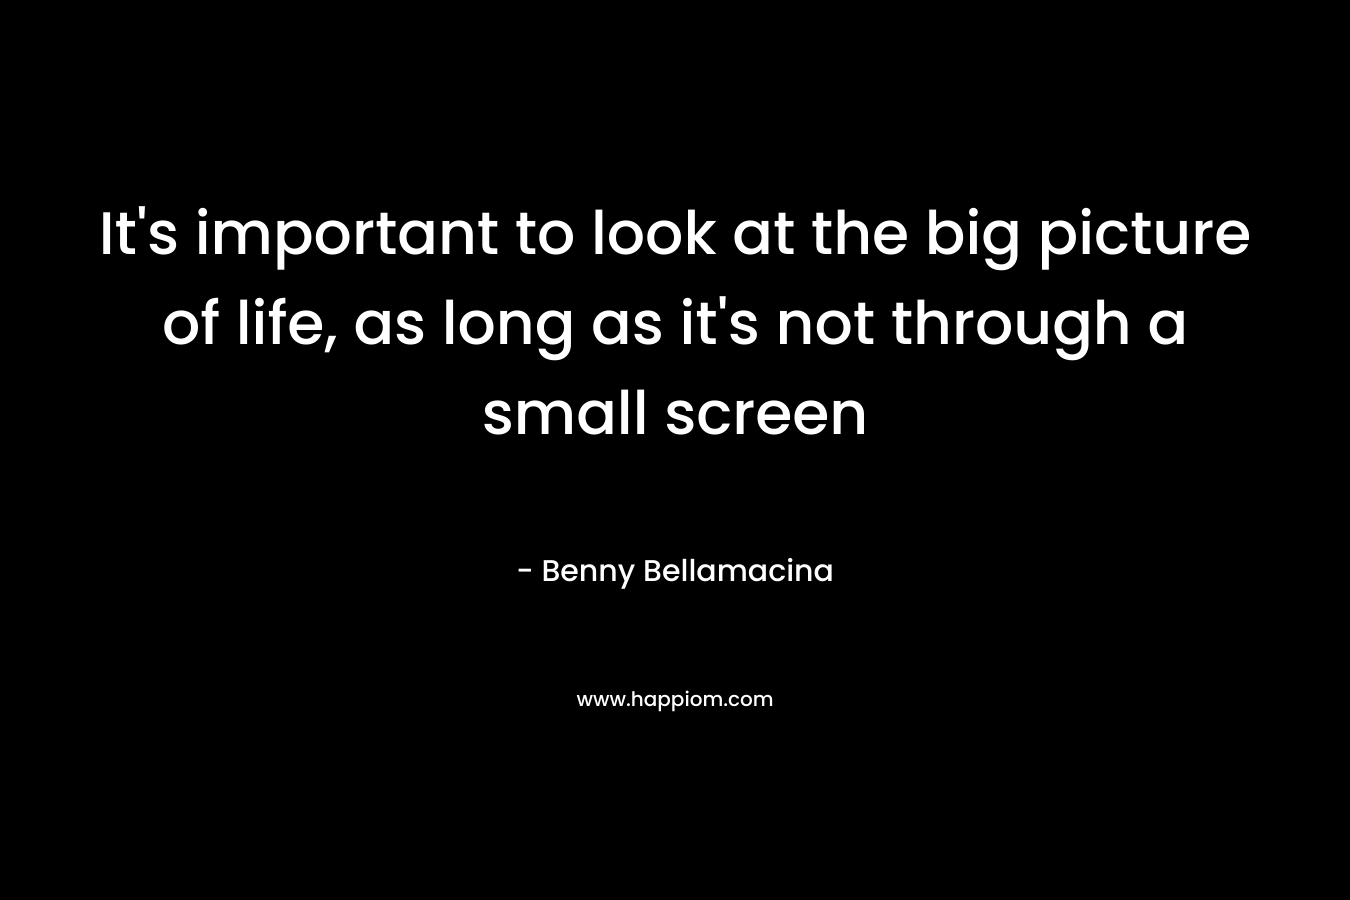 It’s important to look at the big picture of life, as long as it’s not through a small screen – Benny Bellamacina